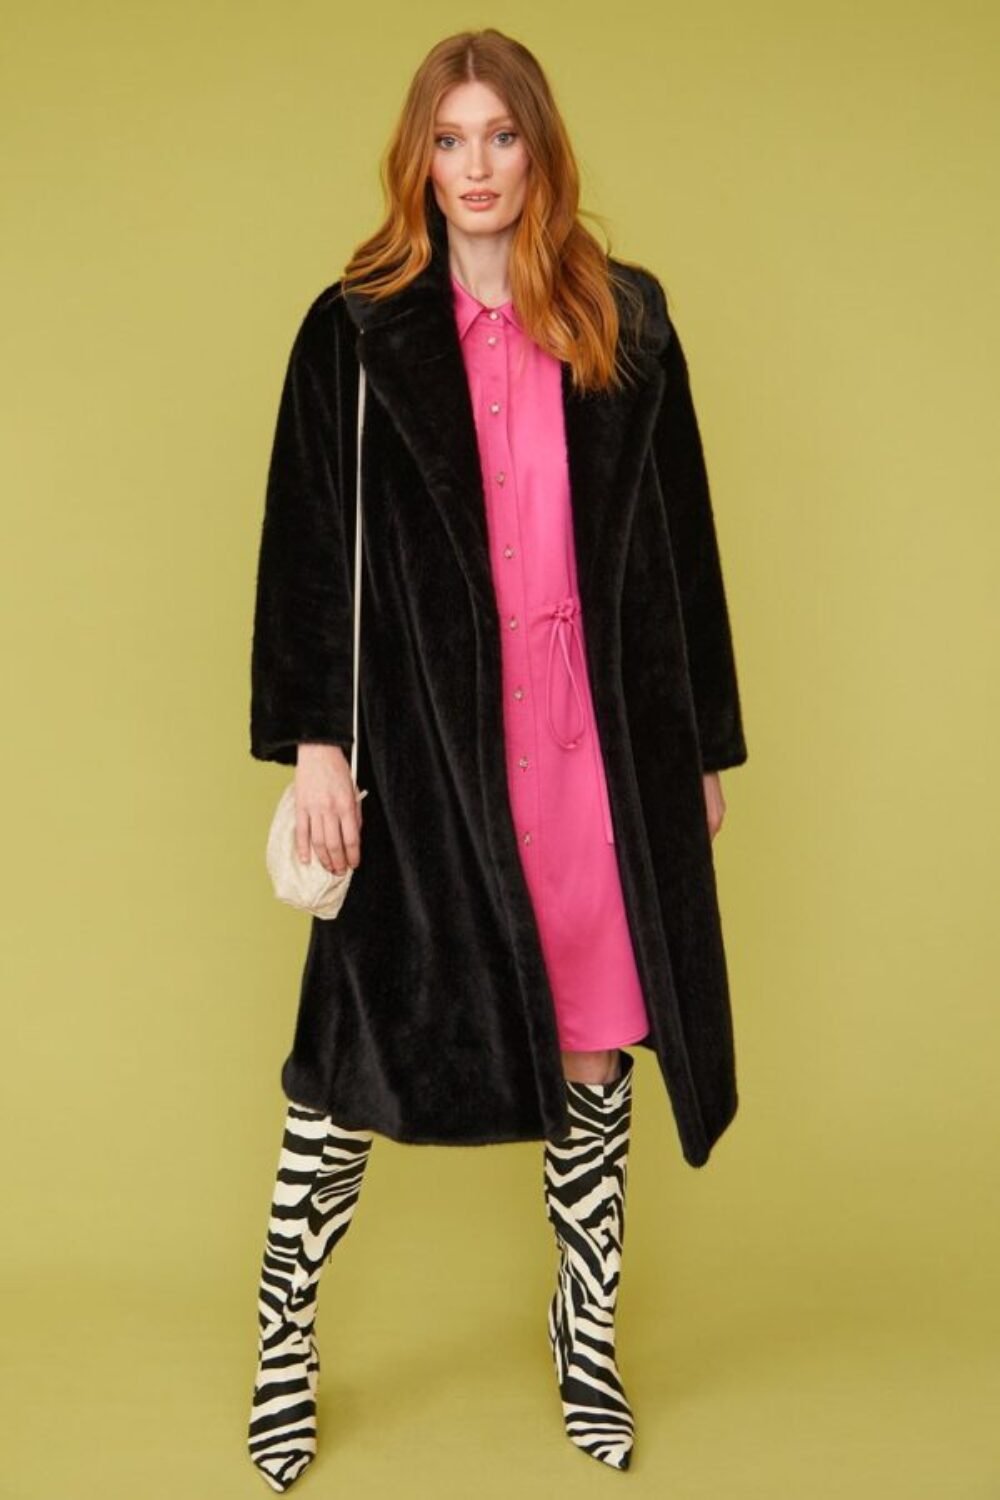 Shop Lux Black Faux Fur Midi Coat and women's luxury and designer clothes at www.lux-apparel.co.uk